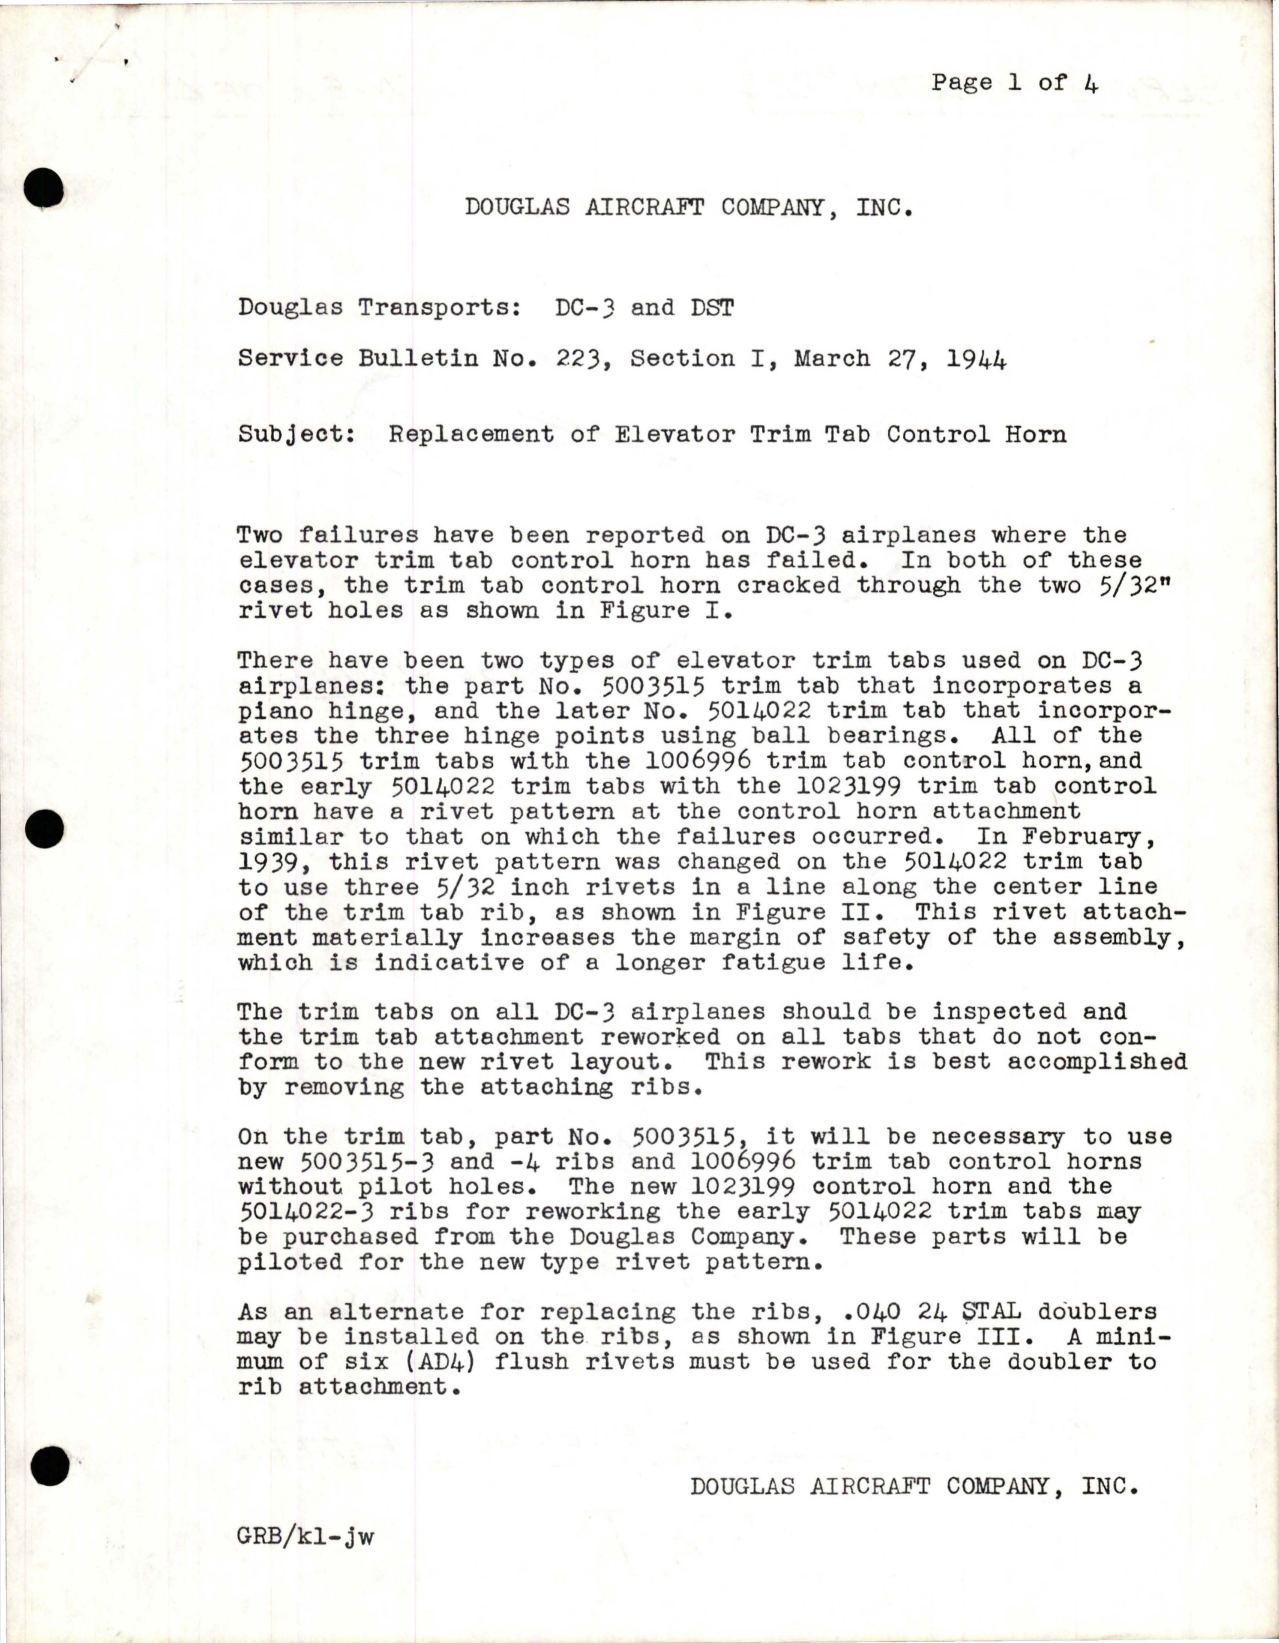 Sample page 1 from AirCorps Library document: Replacement of Elevator Trim Tab Control Horn